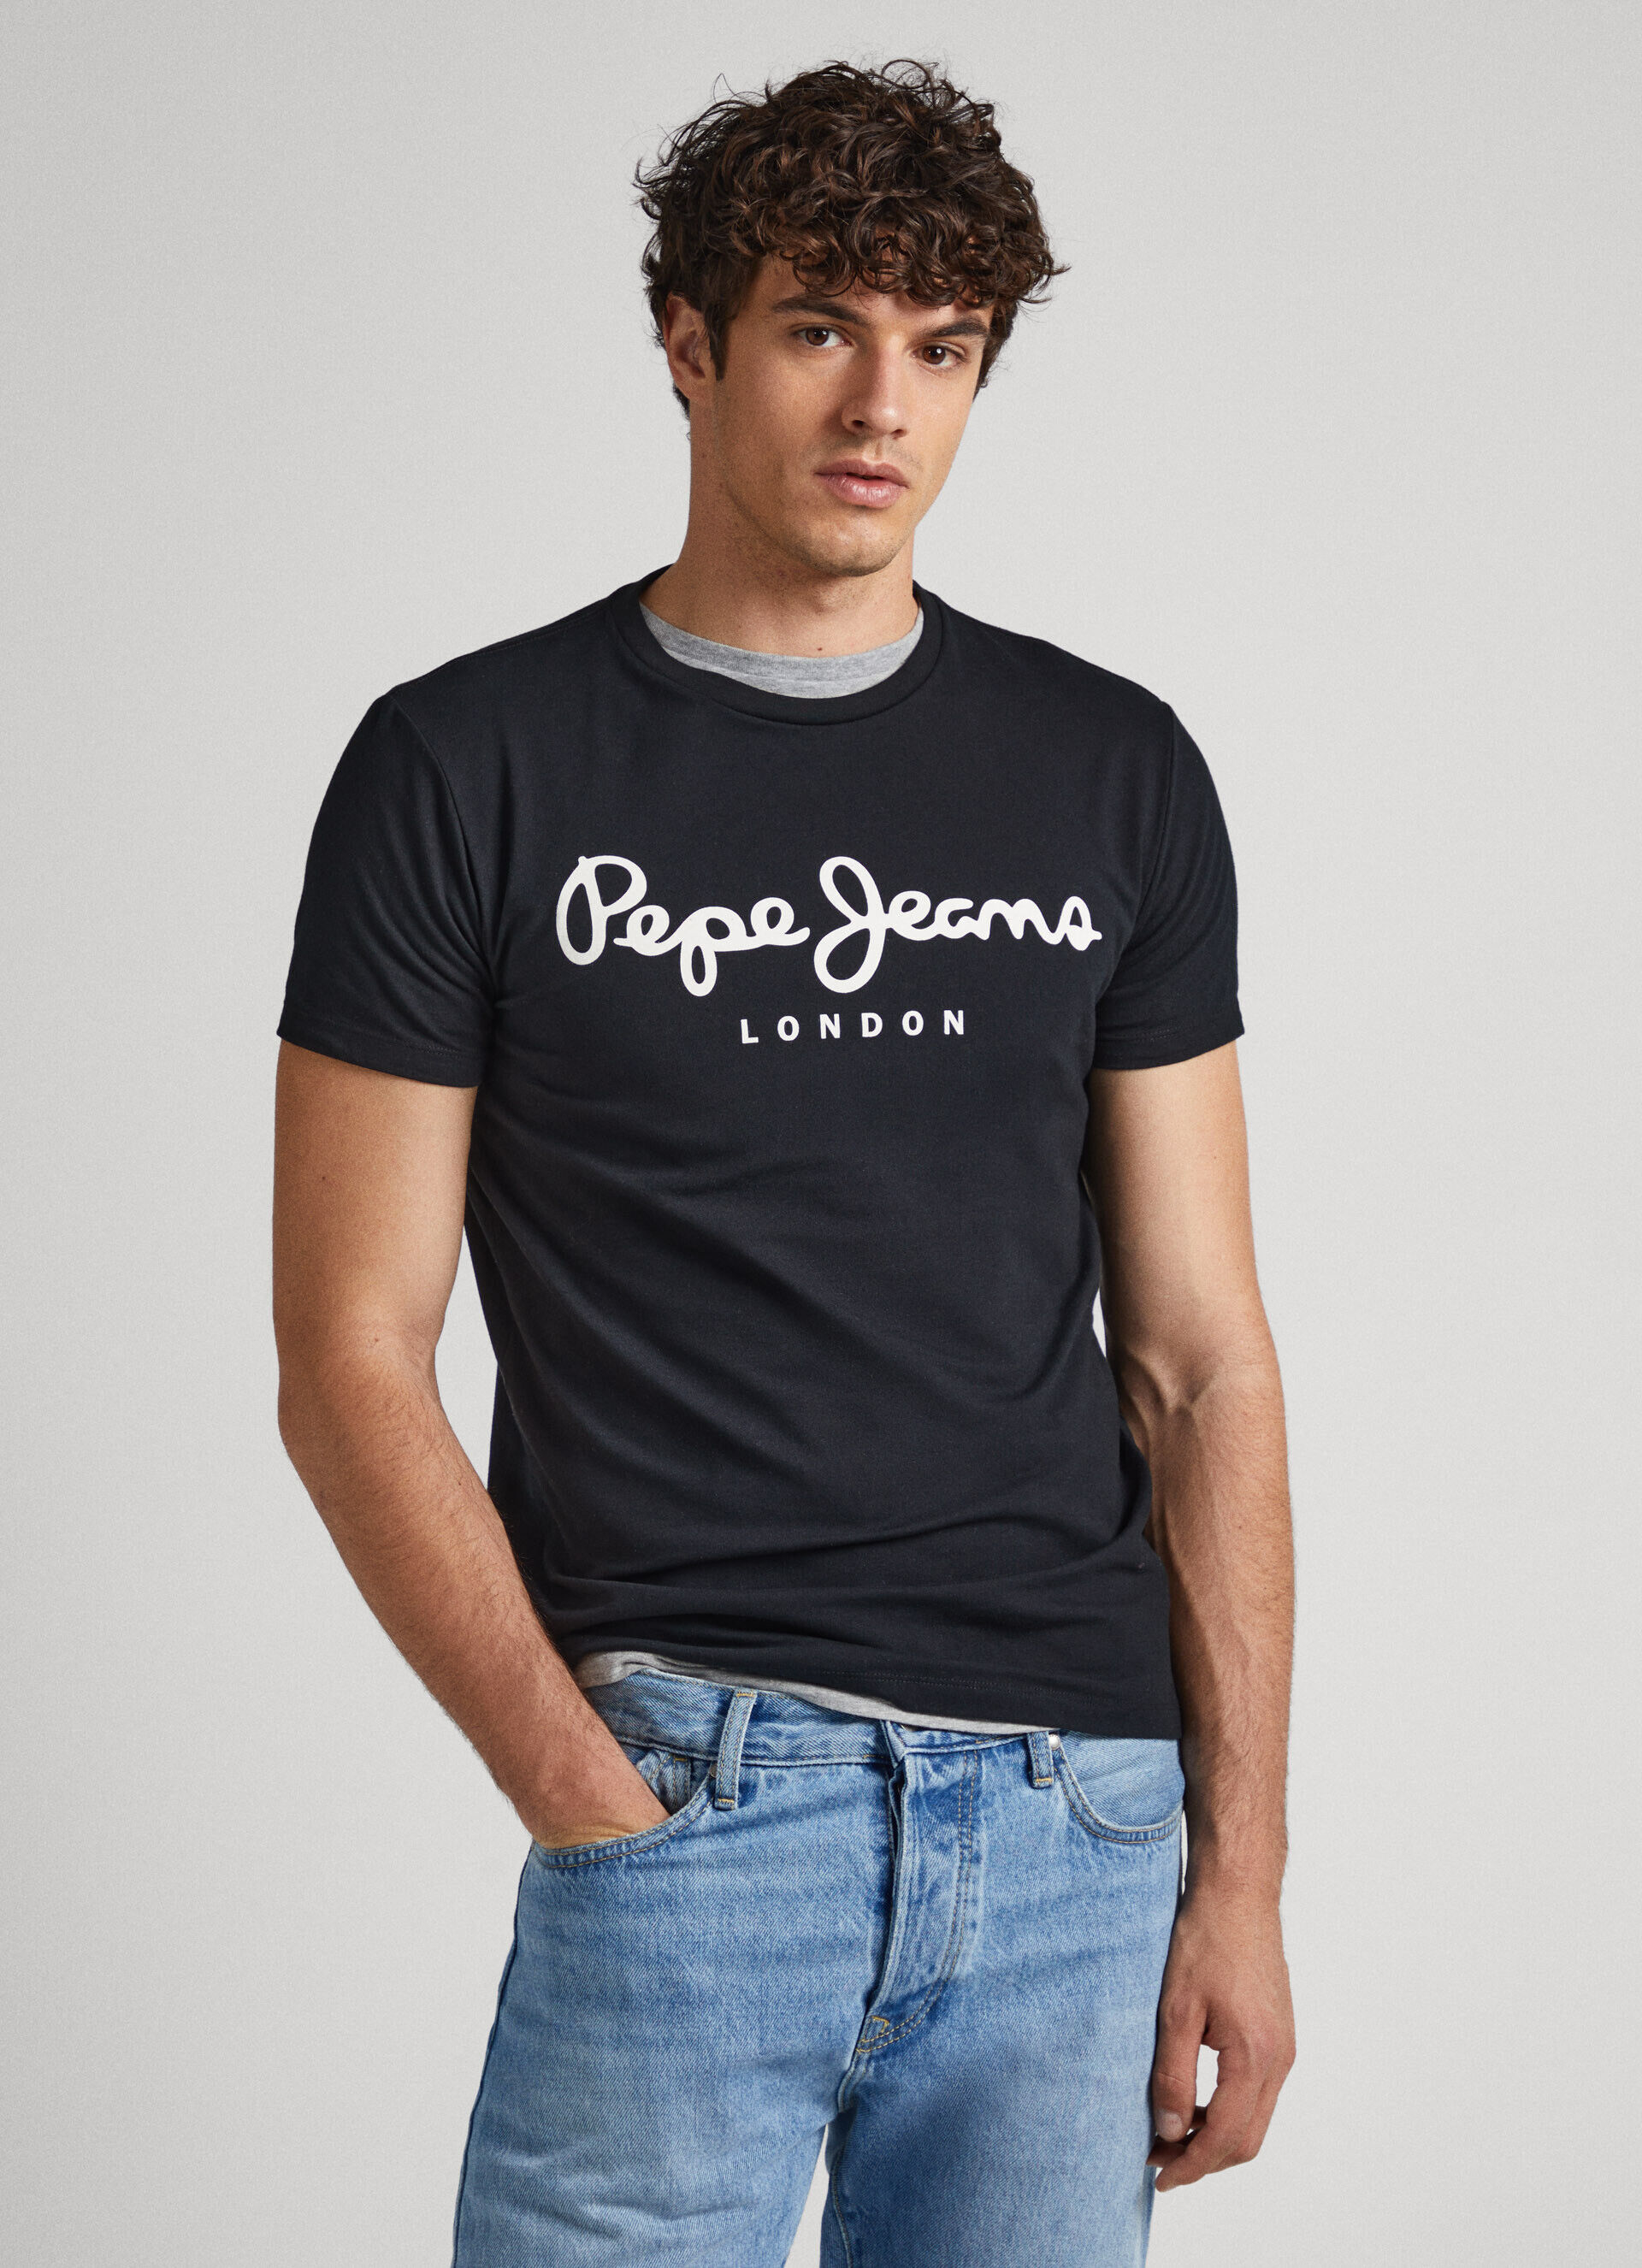 Homme Vêtements Pepe Jeans Homme Tee-shirts & Polos Pepe Jeans Homme Tee-shirts Pepe Jeans Homme Tee-shirts Pepe Jeans Homme noir M Tee-shirt PEPE JEANS 2 